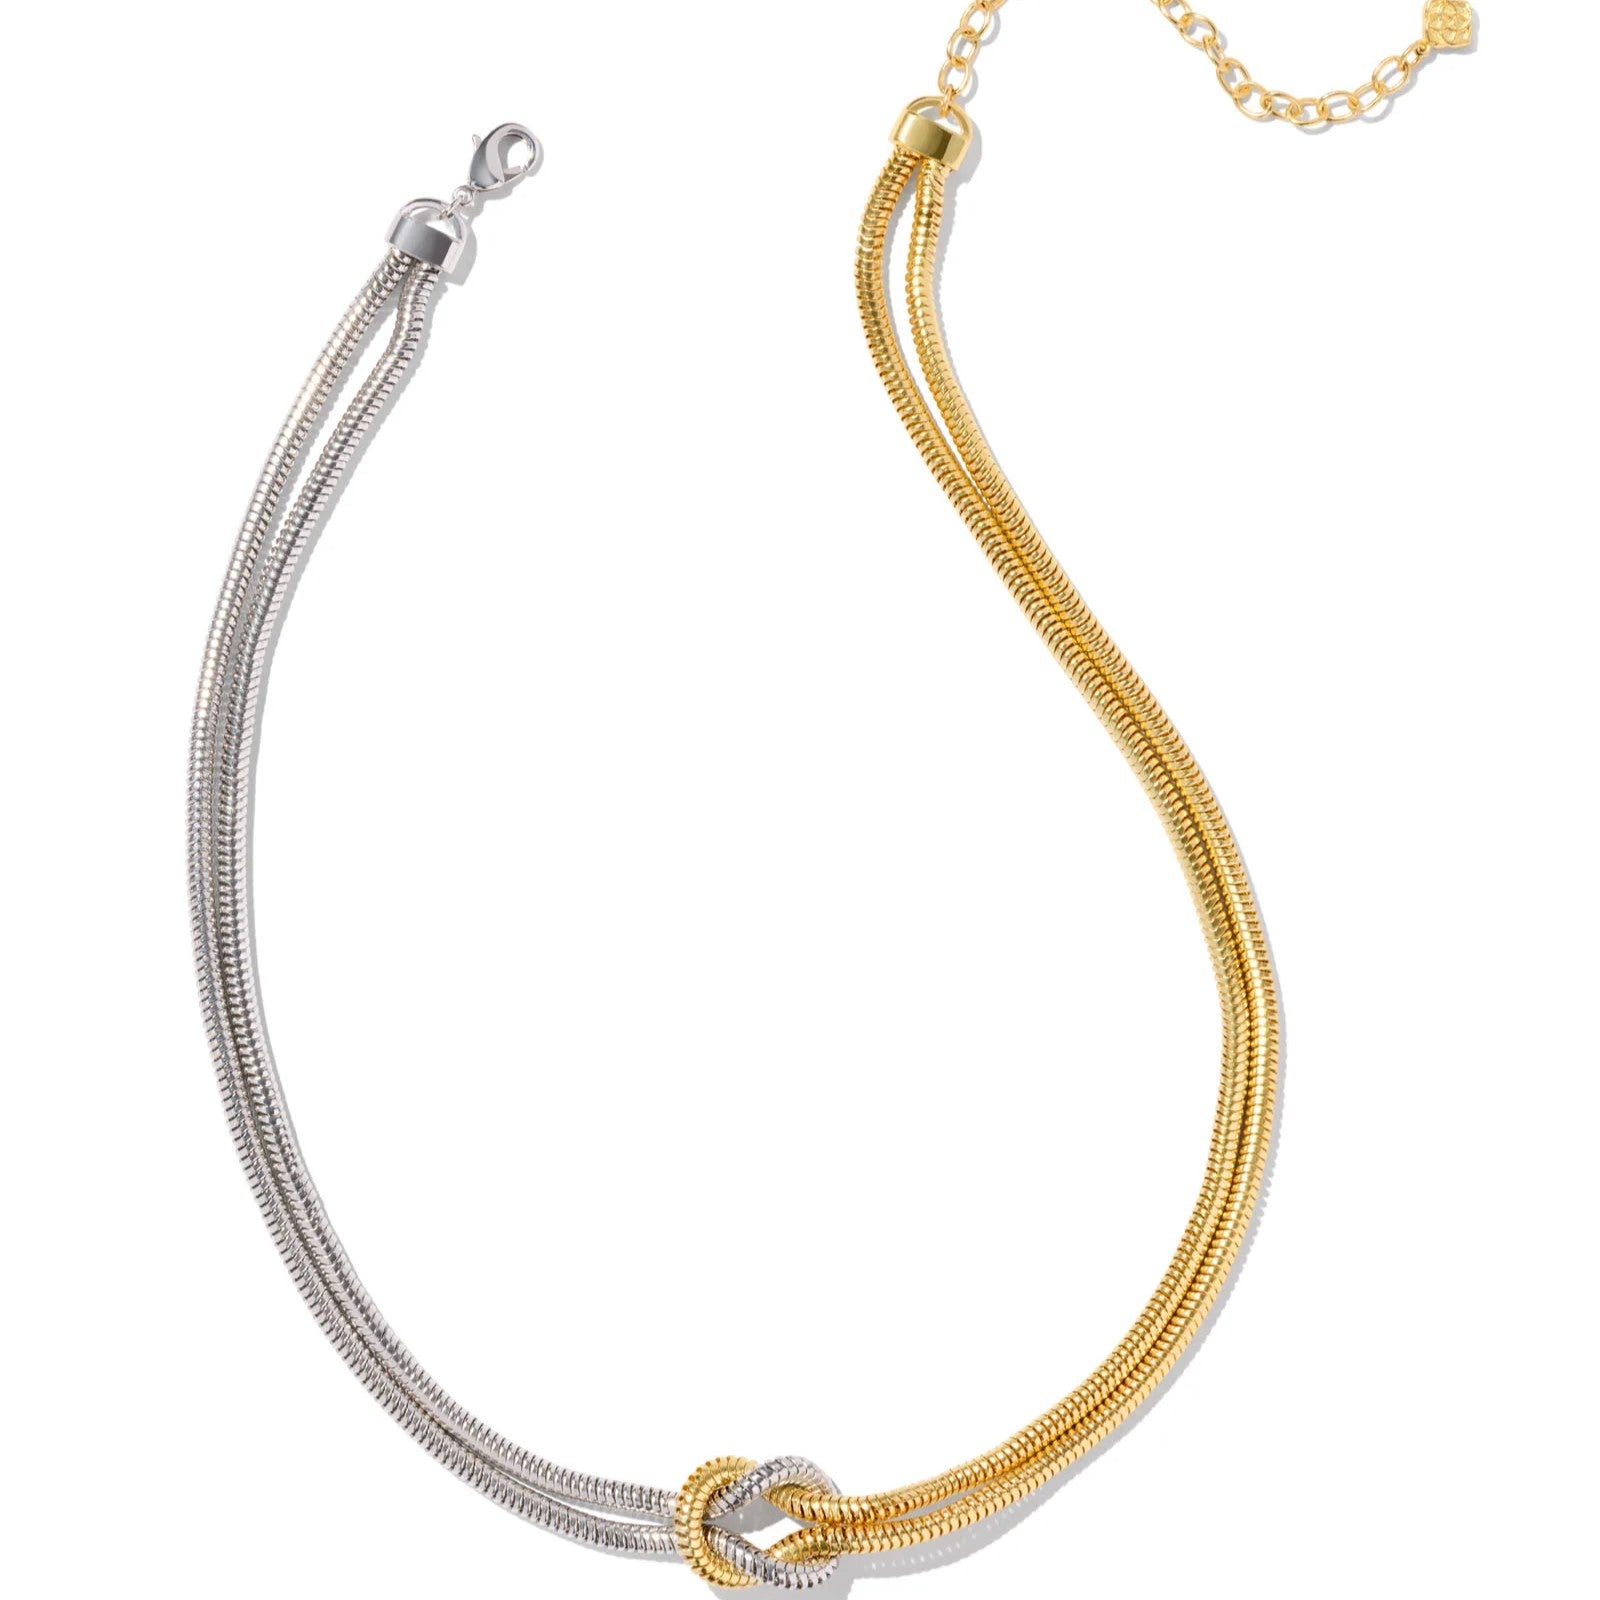 Kendra Scott | Annie Chain Necklace in Mixed Metal - Giddy Up Glamour Boutique